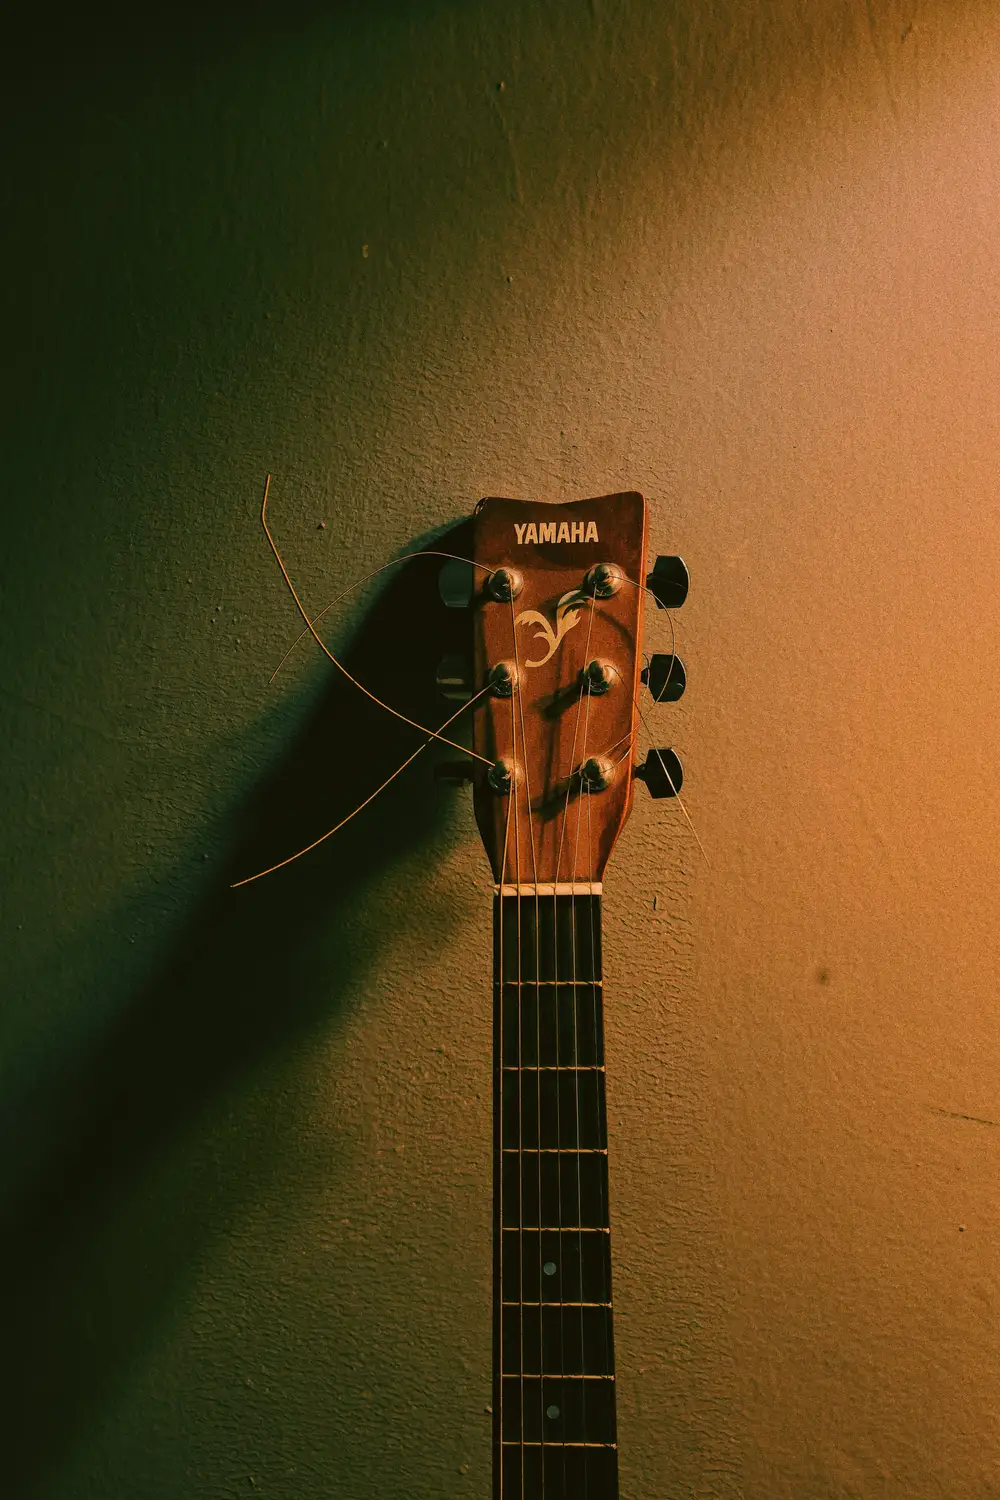 yamaha guitar hanging against the wall